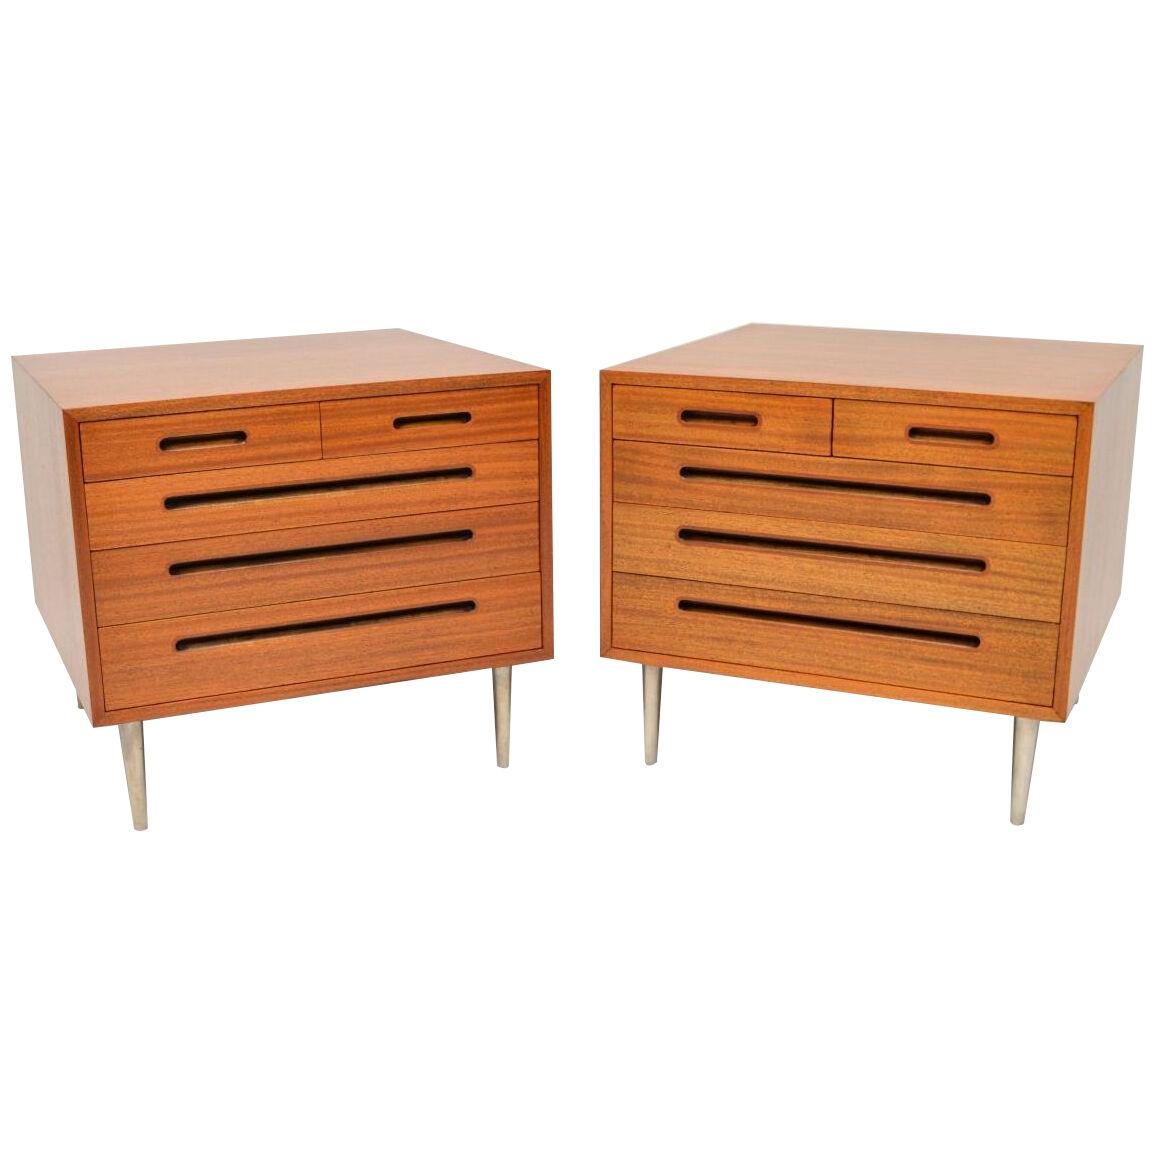 1960's Pair of Vintage Mahogany Chests by Edward Wormley for Dunbar